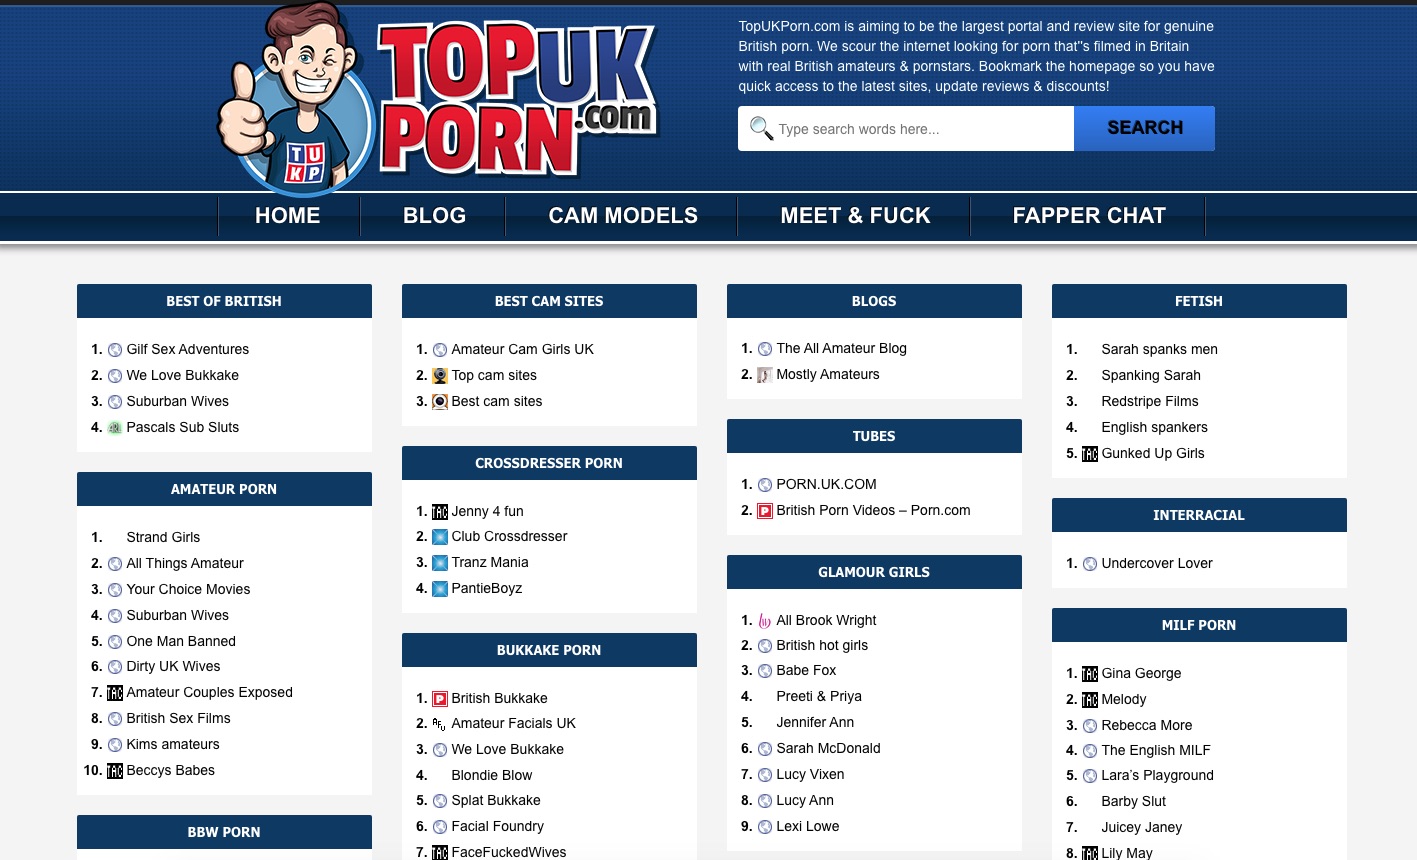 Find the best British porn sites at TopUKPorn